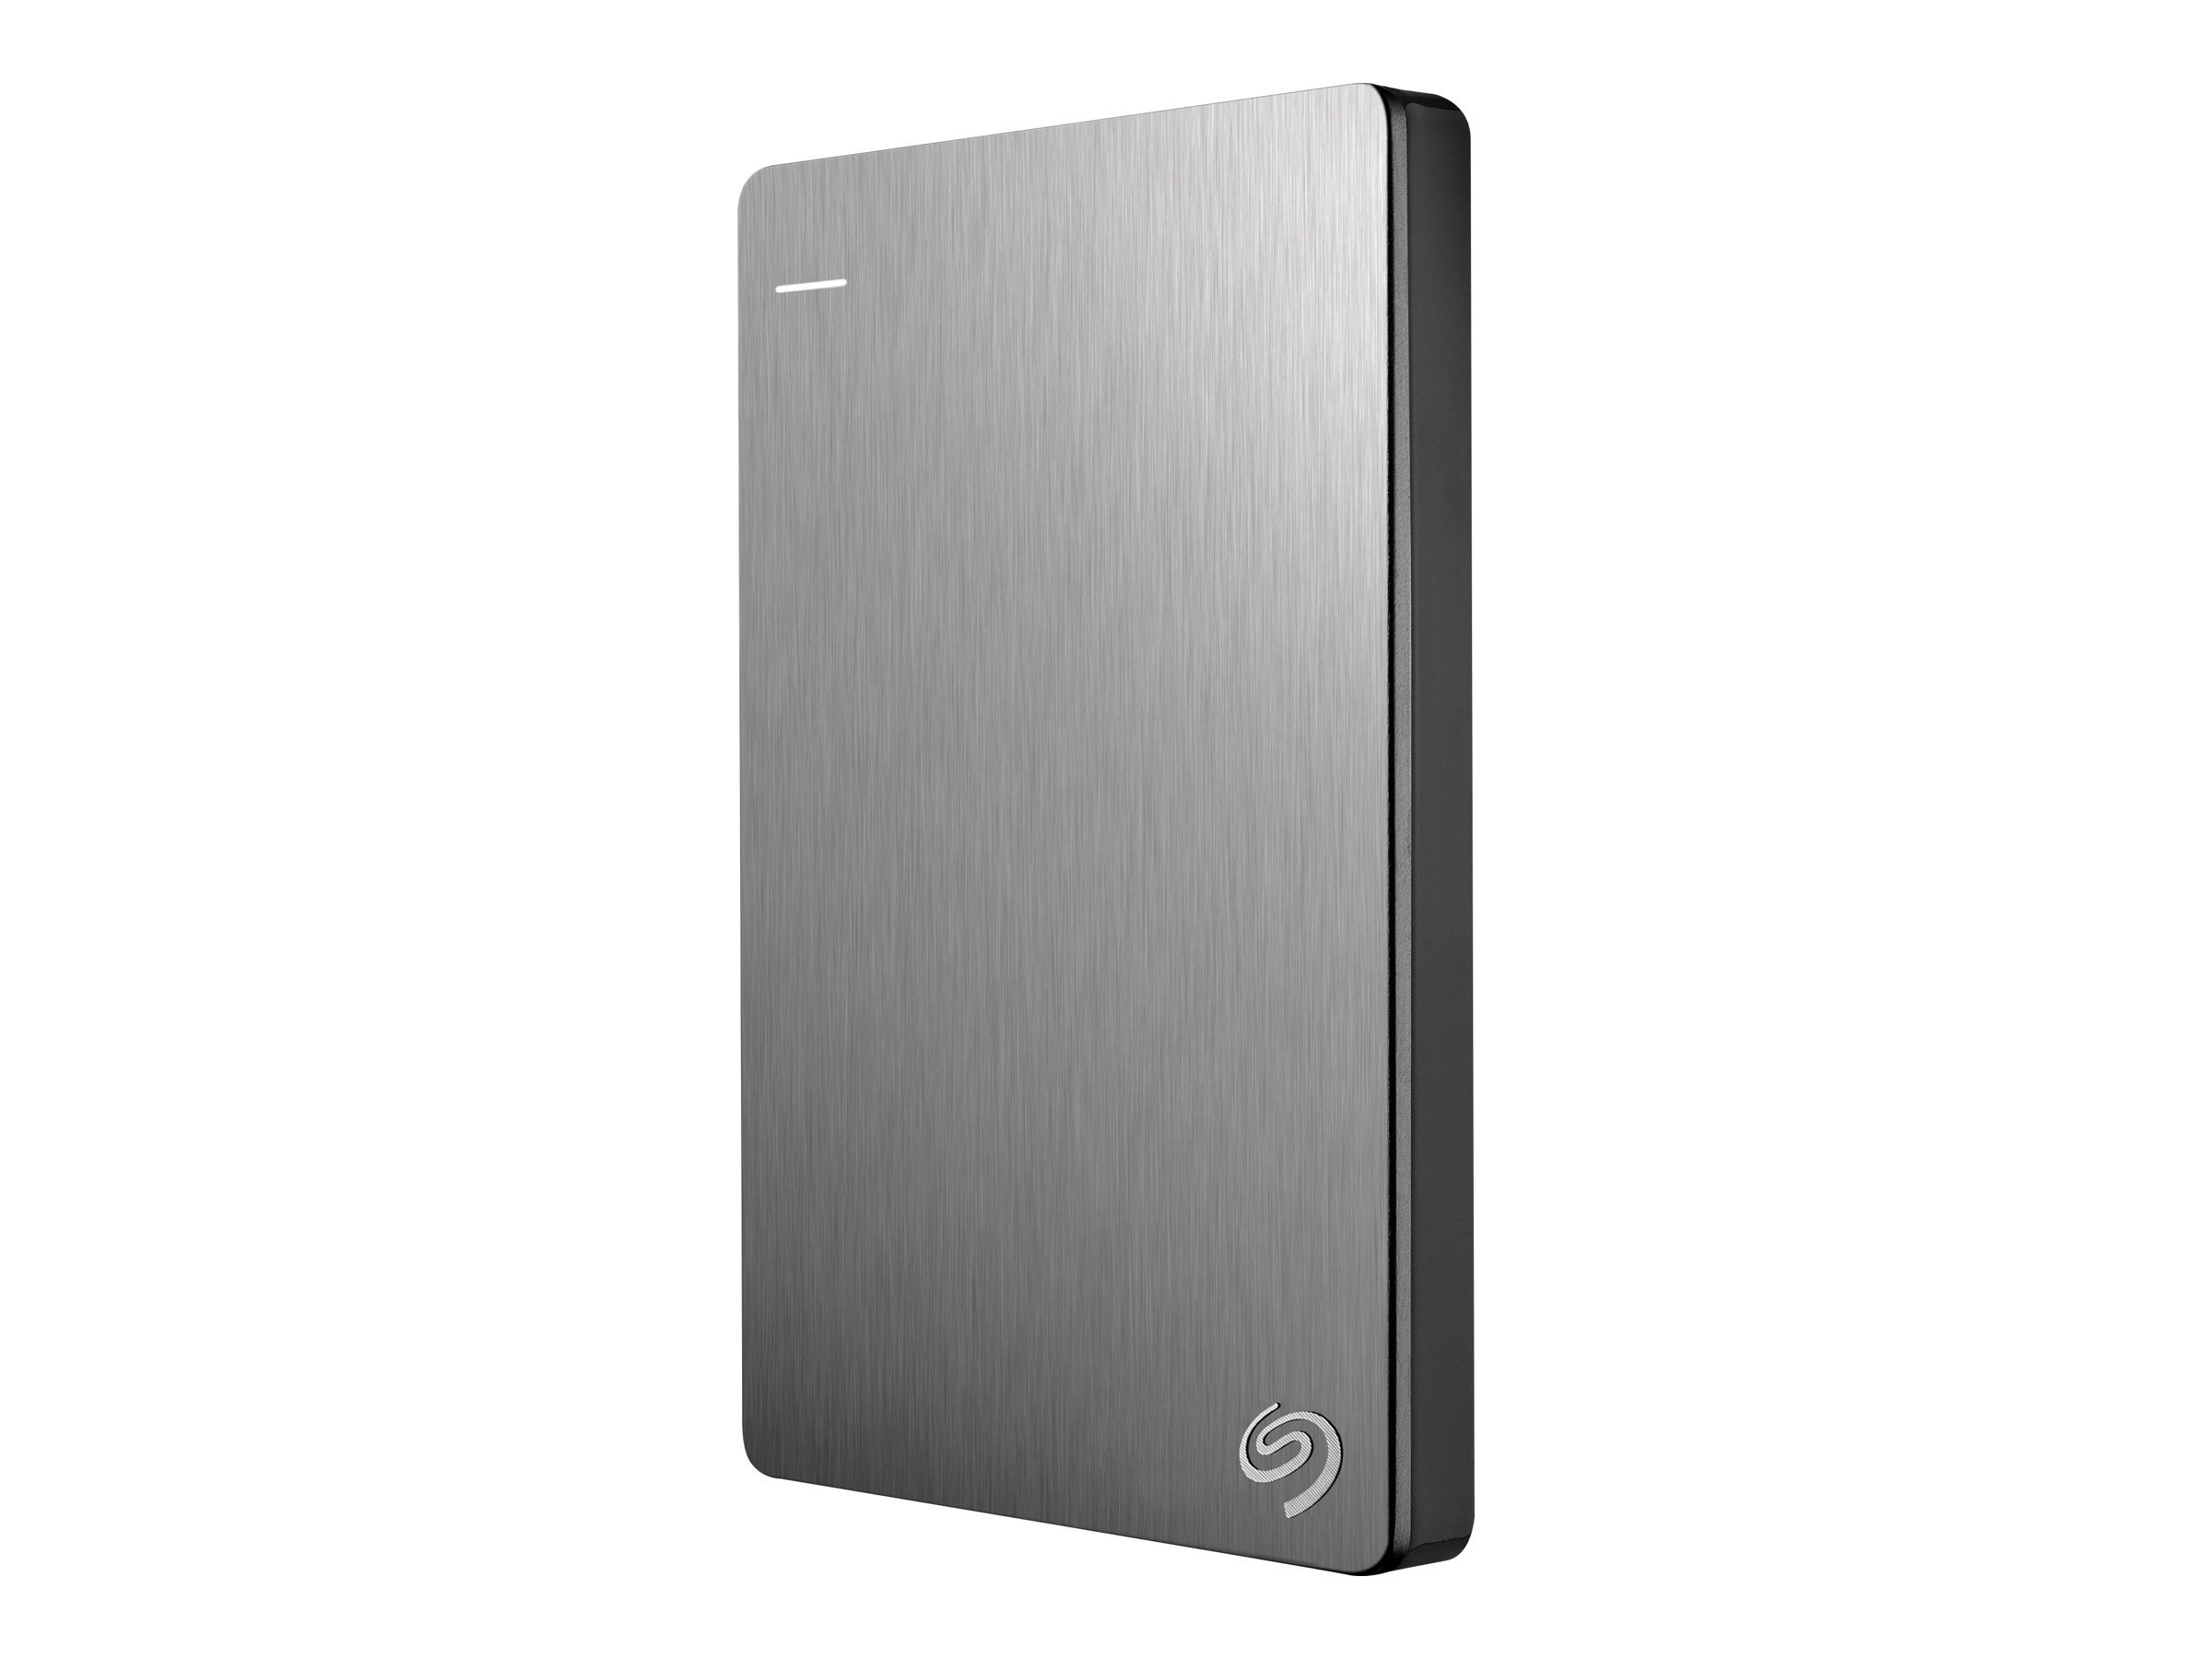 Seagate Backup Plus Portable 5TB External Hard Drive HDD – Silver USB 3.0 for PC Laptop and Mac, 2 Months Adobe CC Photography (STDR5000101)